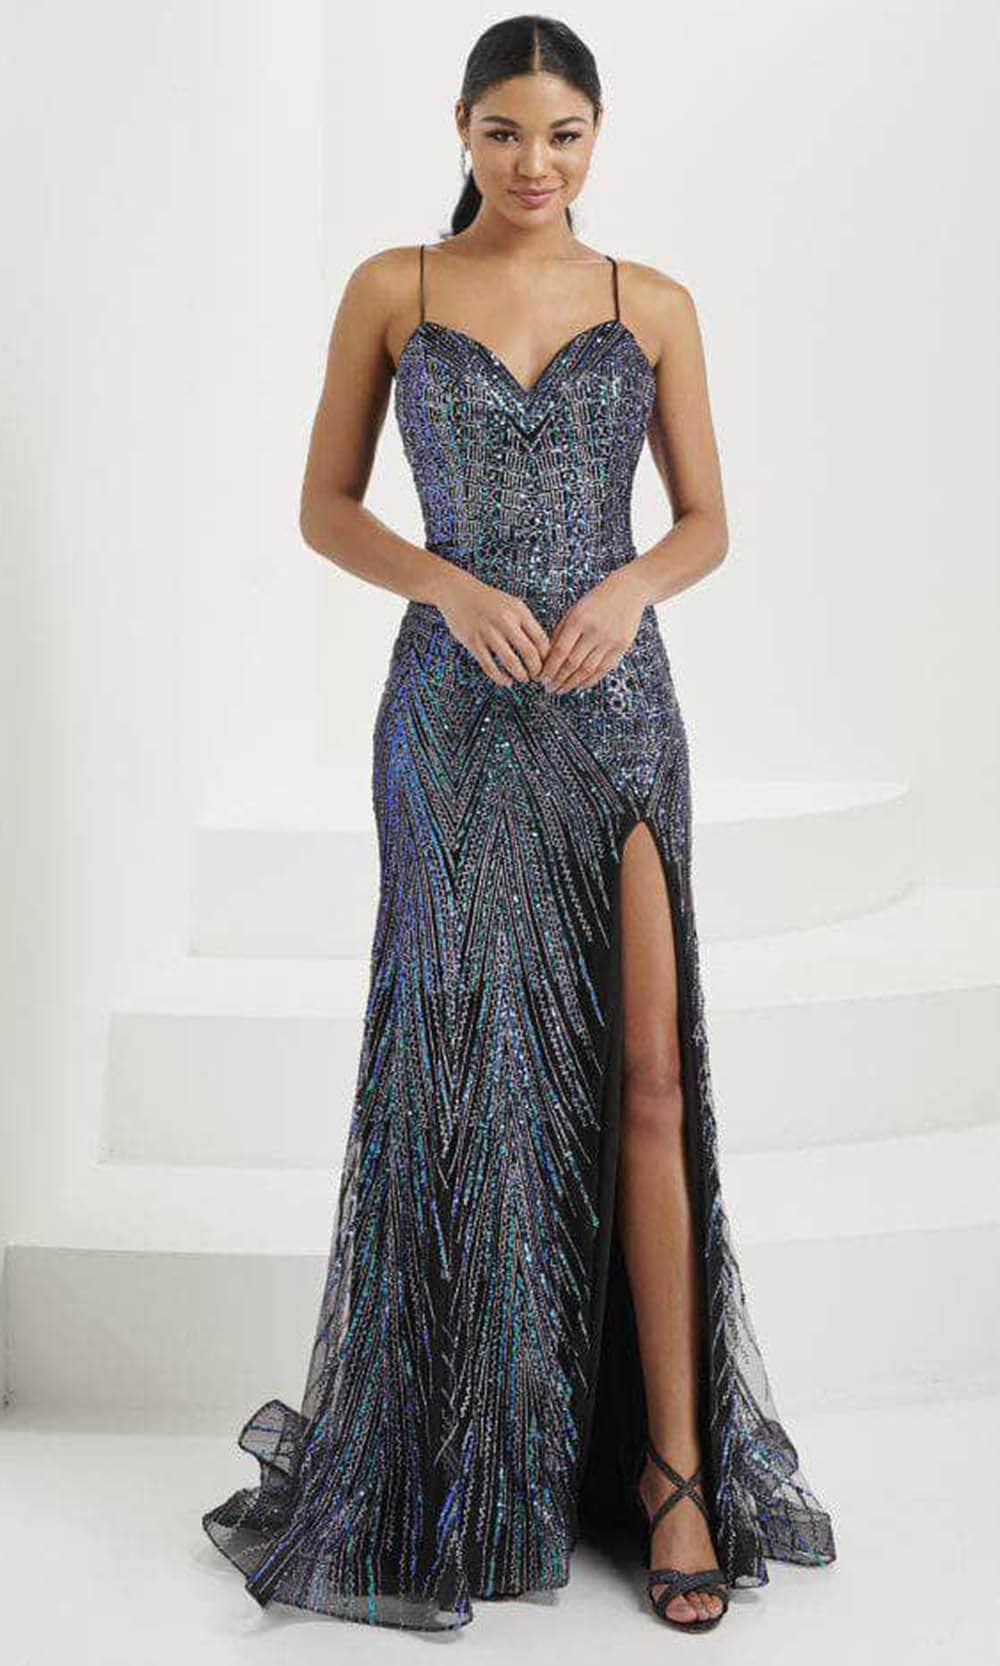 Image of Tiffany Designs 16094 - Embellished Sweetheart Evening Gown